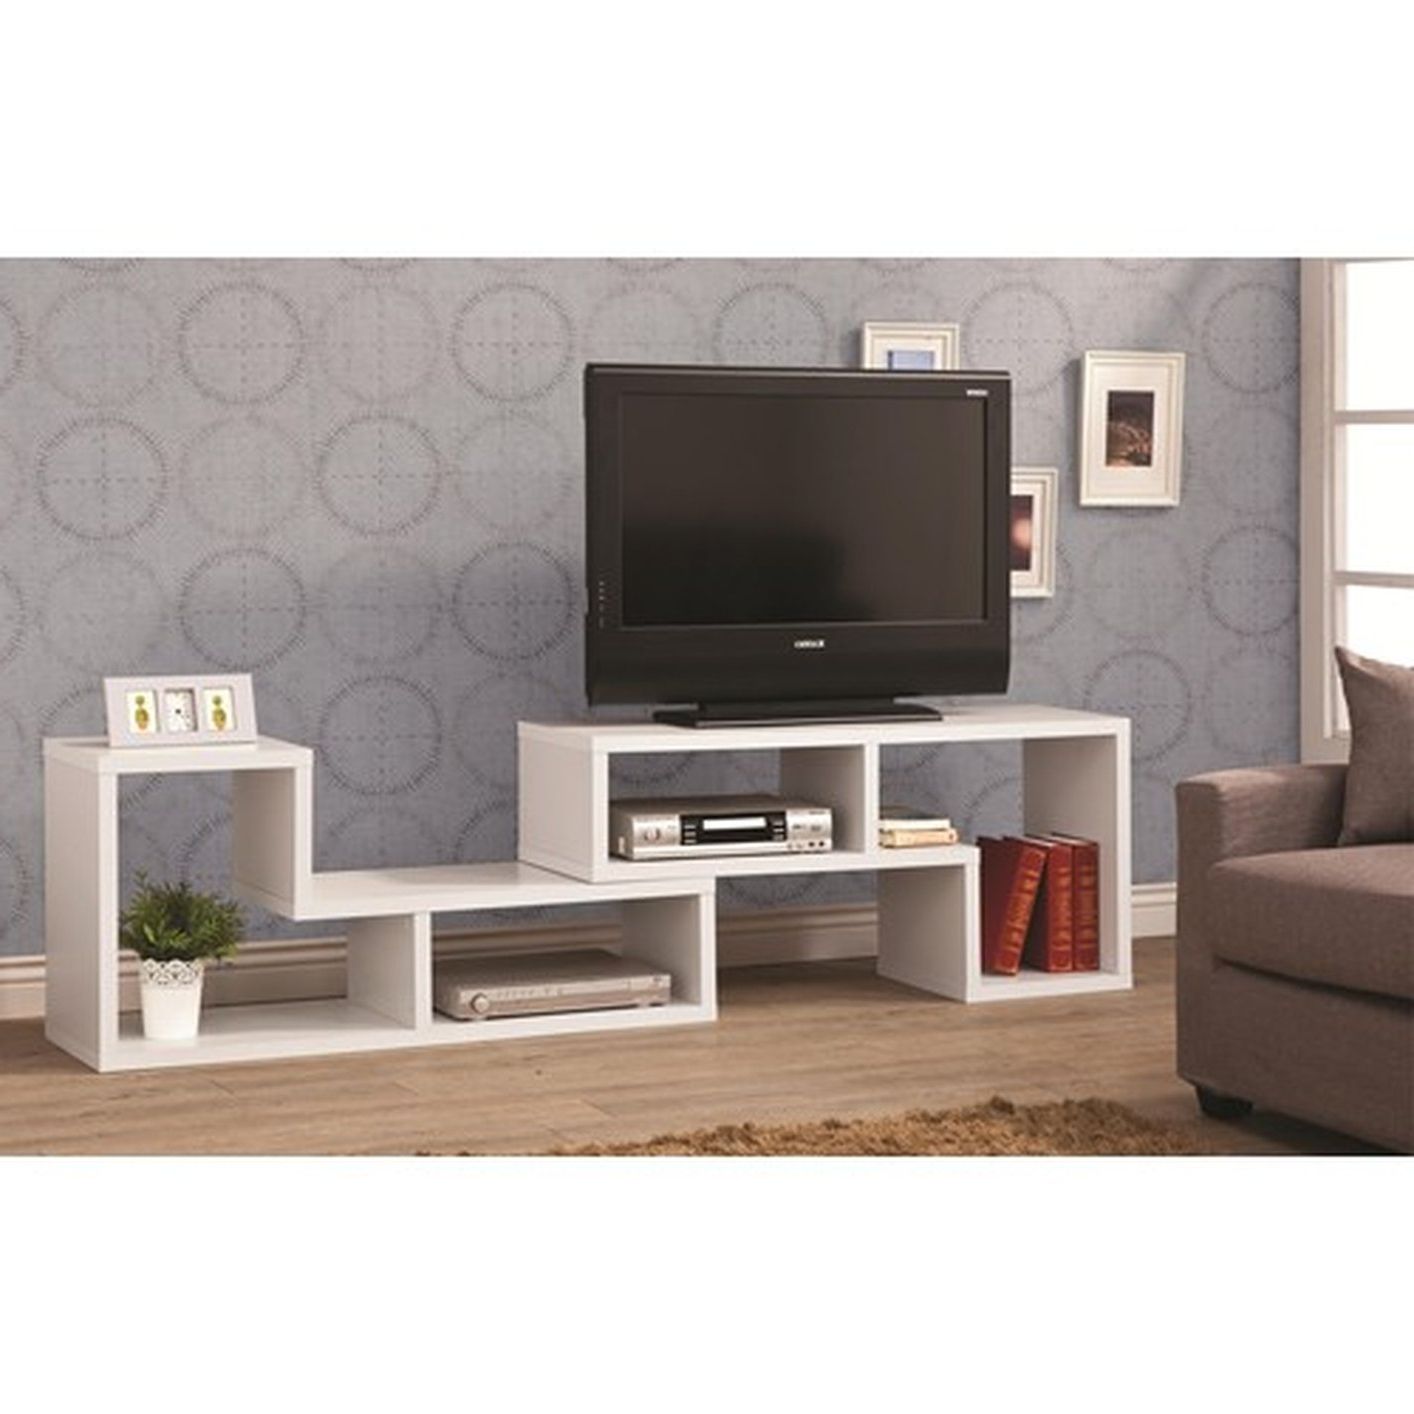 Popular Cheap Wooden Tv Stands (View 8 of 20)